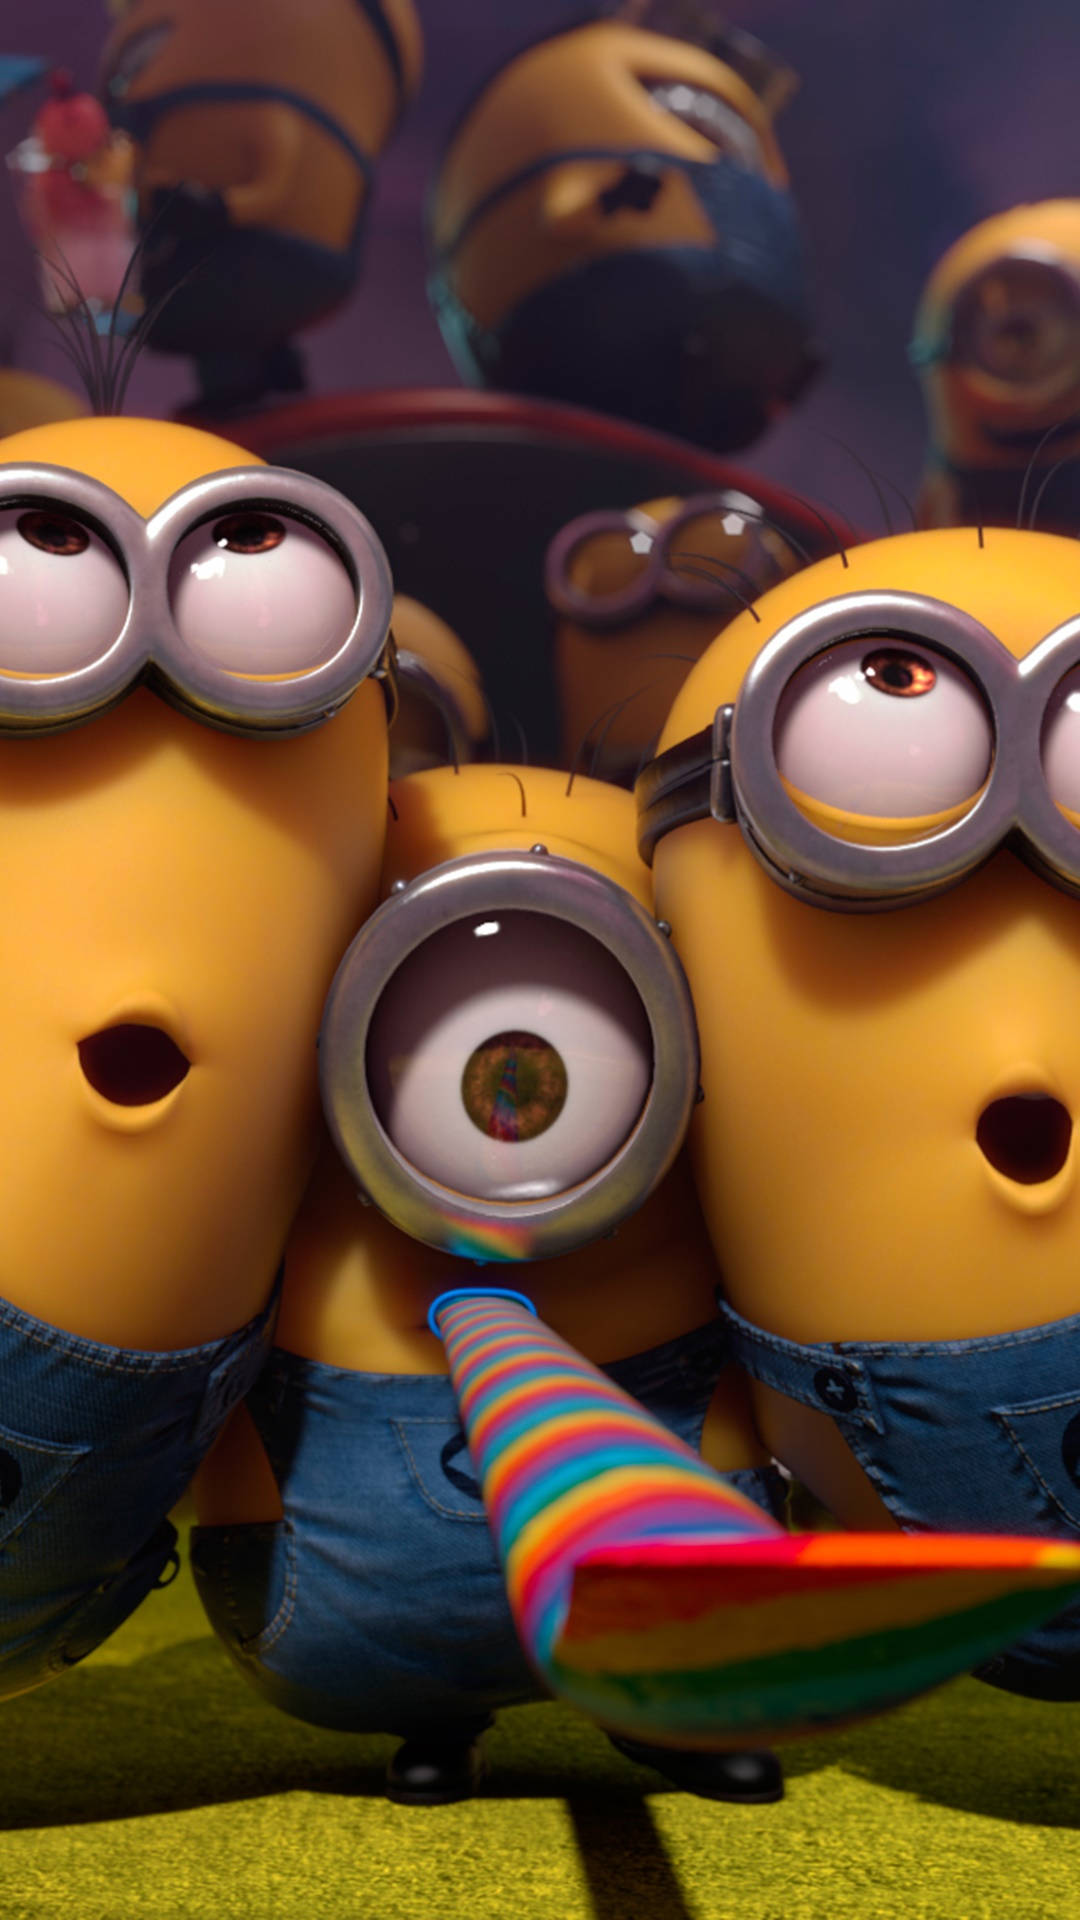 Three Party Minions Despicable Me 2 Picture